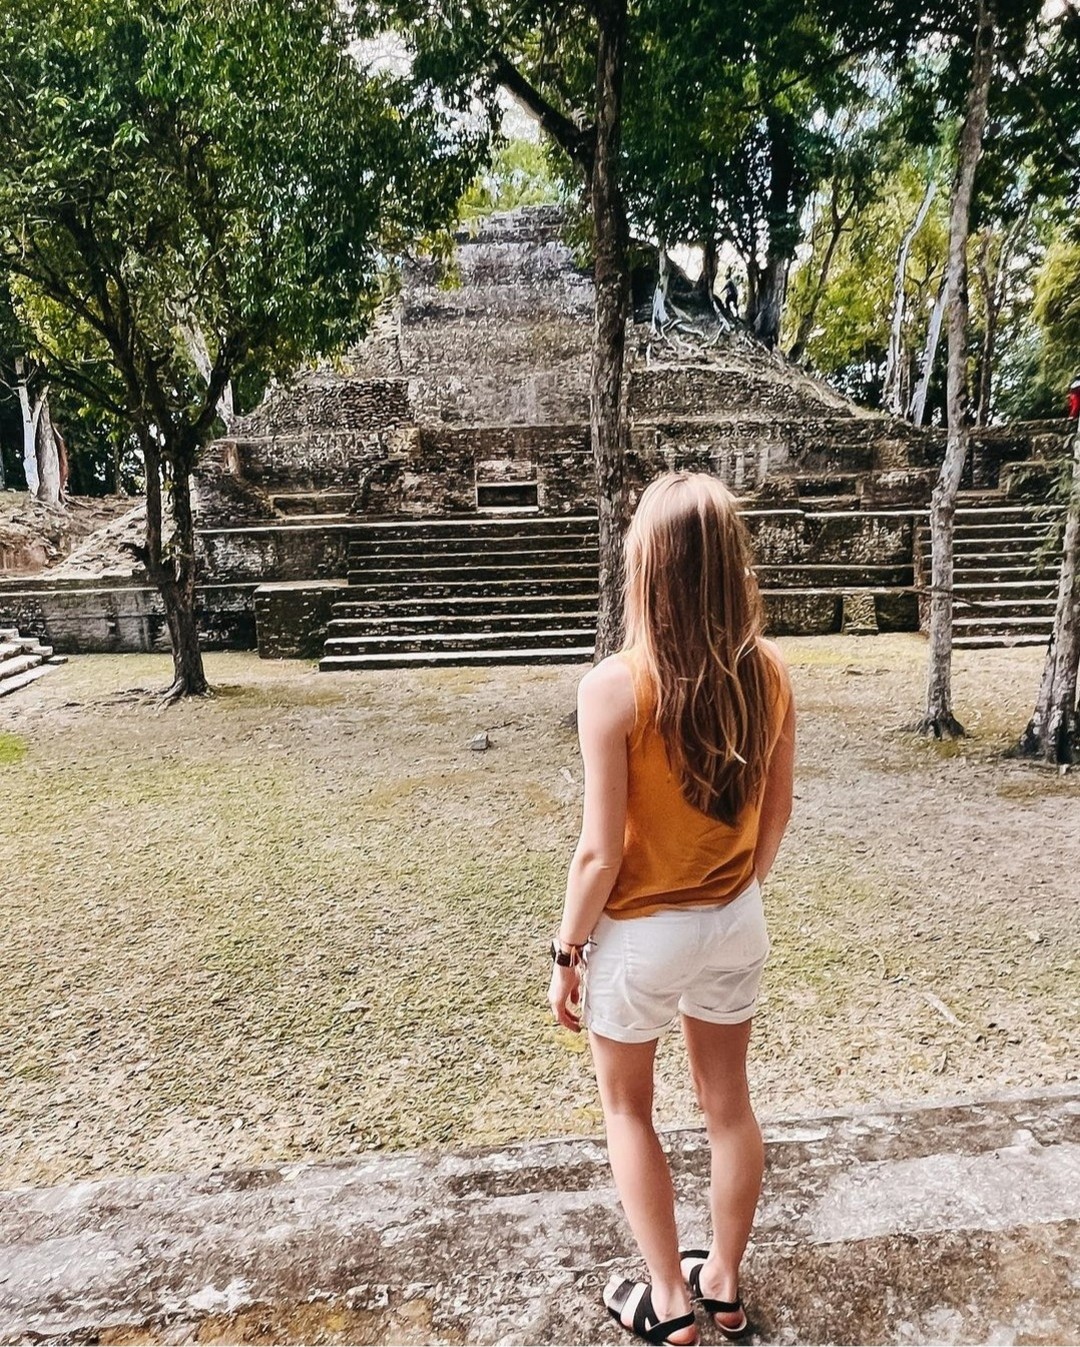 Have you visit the Cahal Pech Archaeological Reserve before? Overlooking the town of San Ignacio, the site is easily accessible just a few minutes from downtown. #travelbelize

📸:@bloom.pnw